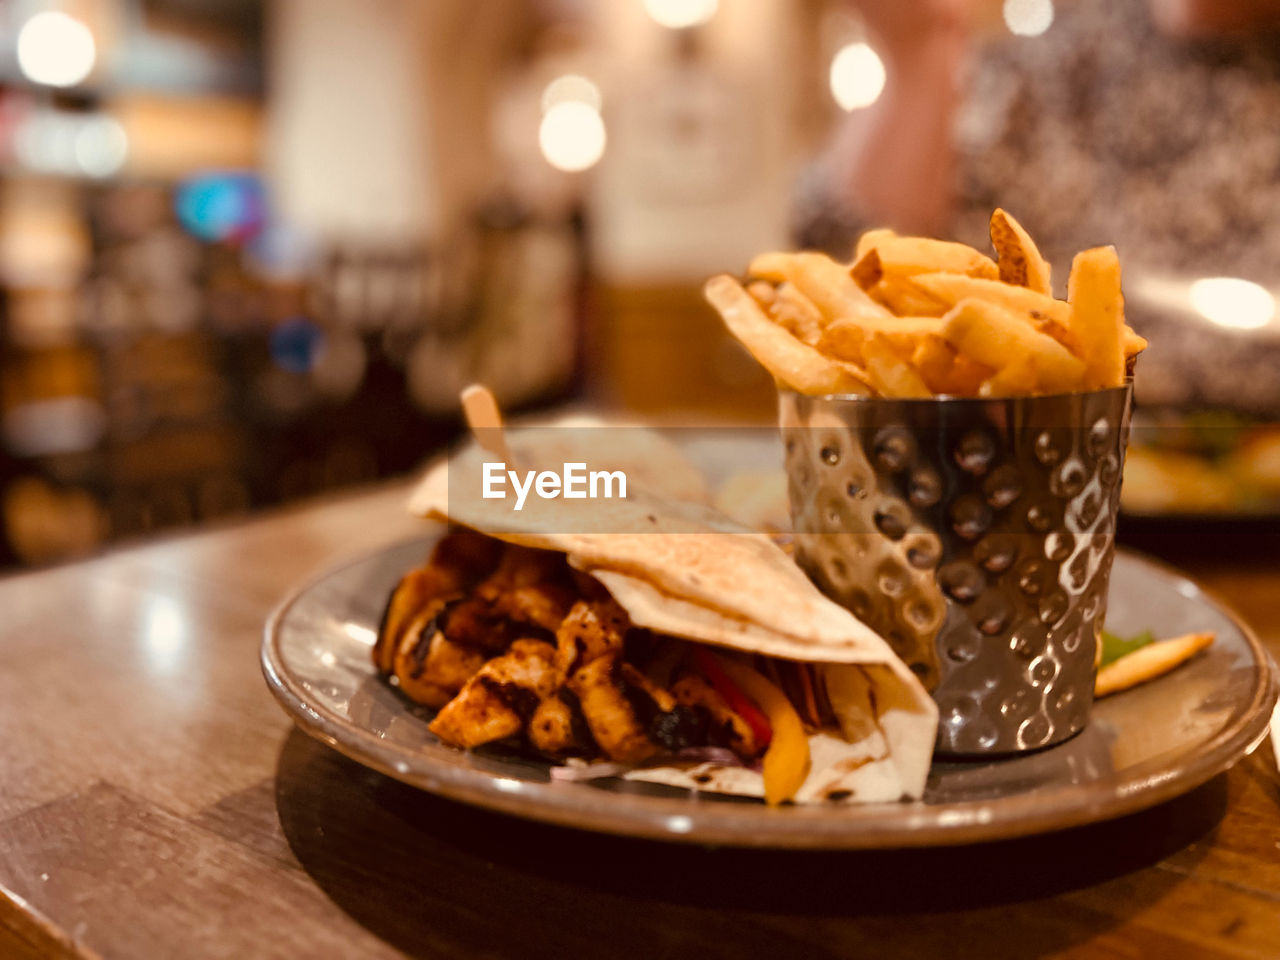 food and drink, food, fast food, meal, breakfast, unhealthy eating, raw potato, dish, snack, freshness, restaurant, fried, focus on foreground, french fries, no people, table, business, close-up, brunch, indoors, bar, mexican food, plate, tortilla chip, appetizer, cafe, selective focus